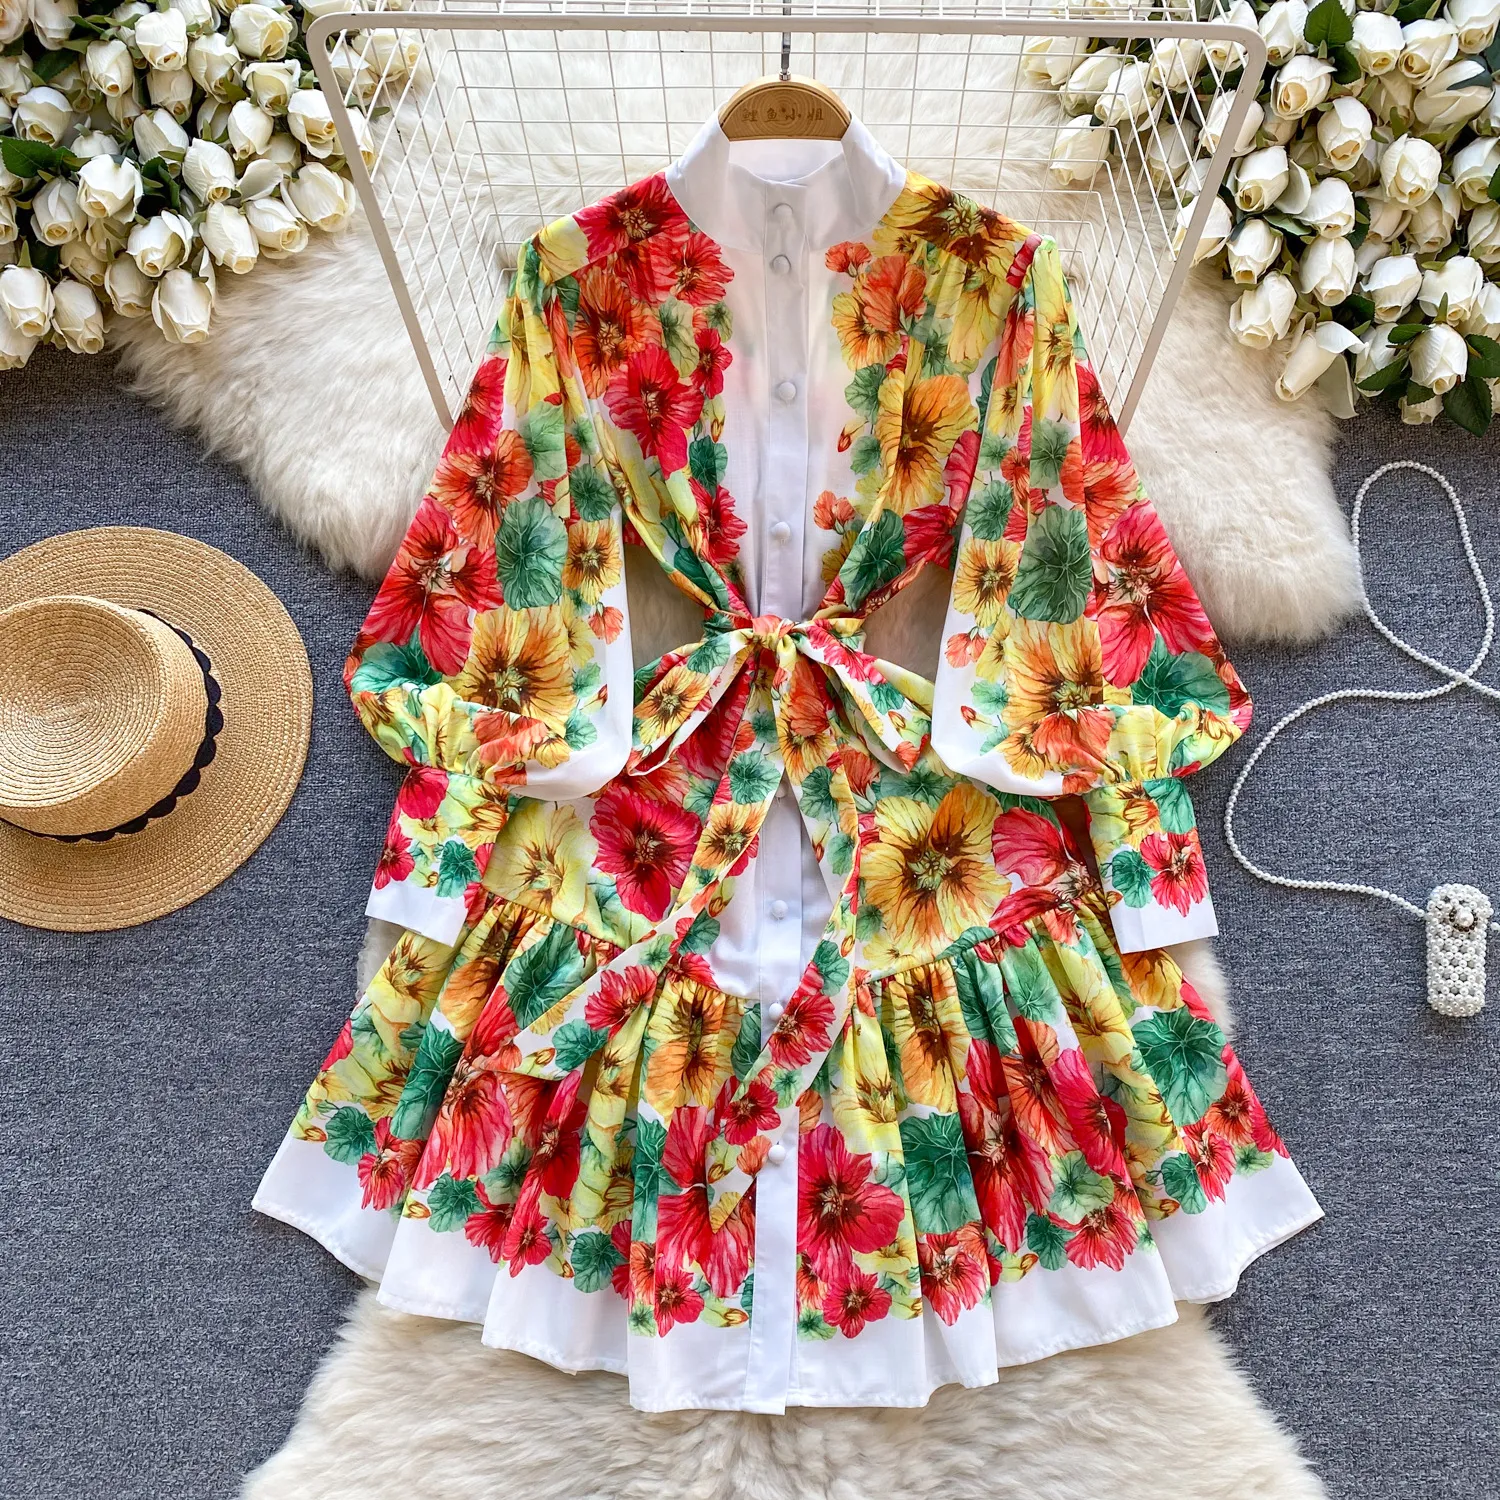 Fanhua series palace style dress, spring dress, women's design, printed slim fit short style, high-end small dress gift